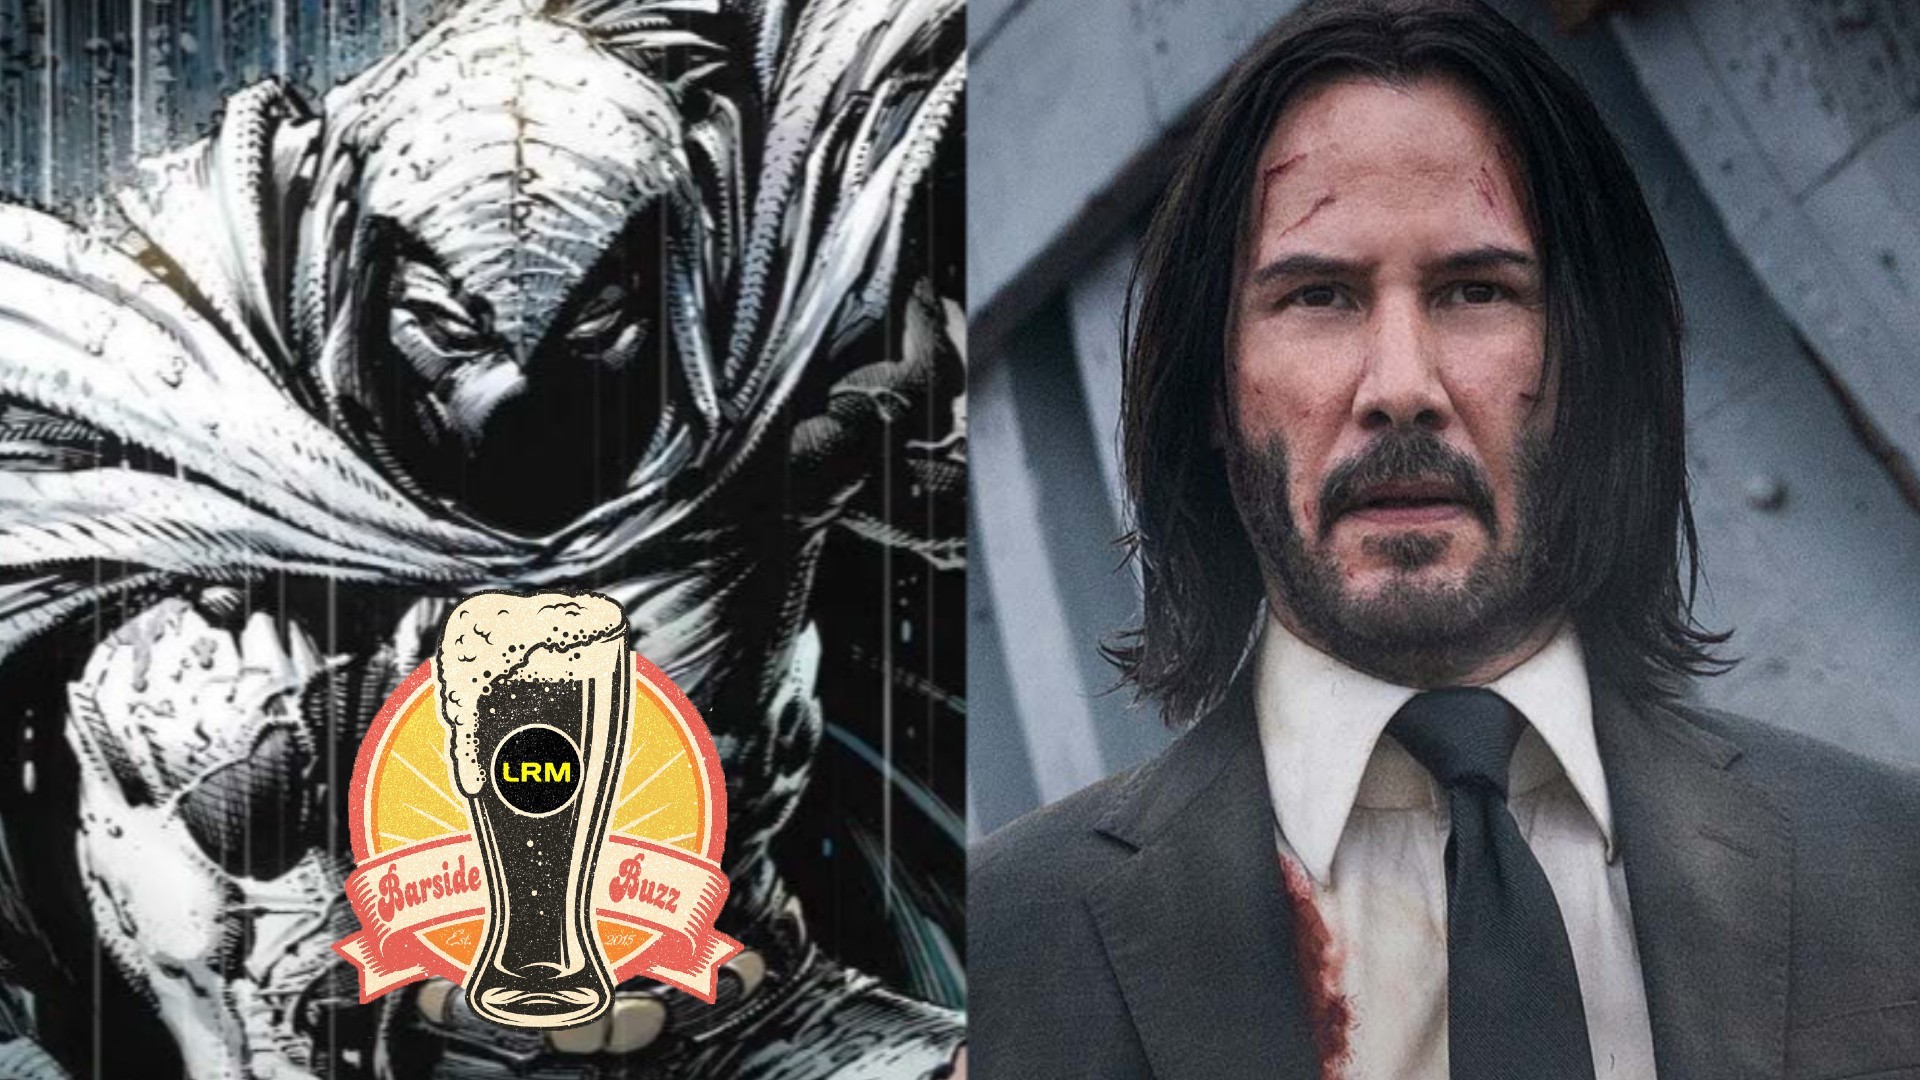 RUMOR: Keanu Reeves Could Play Moon Knight? | LRM’s Barside Buzz